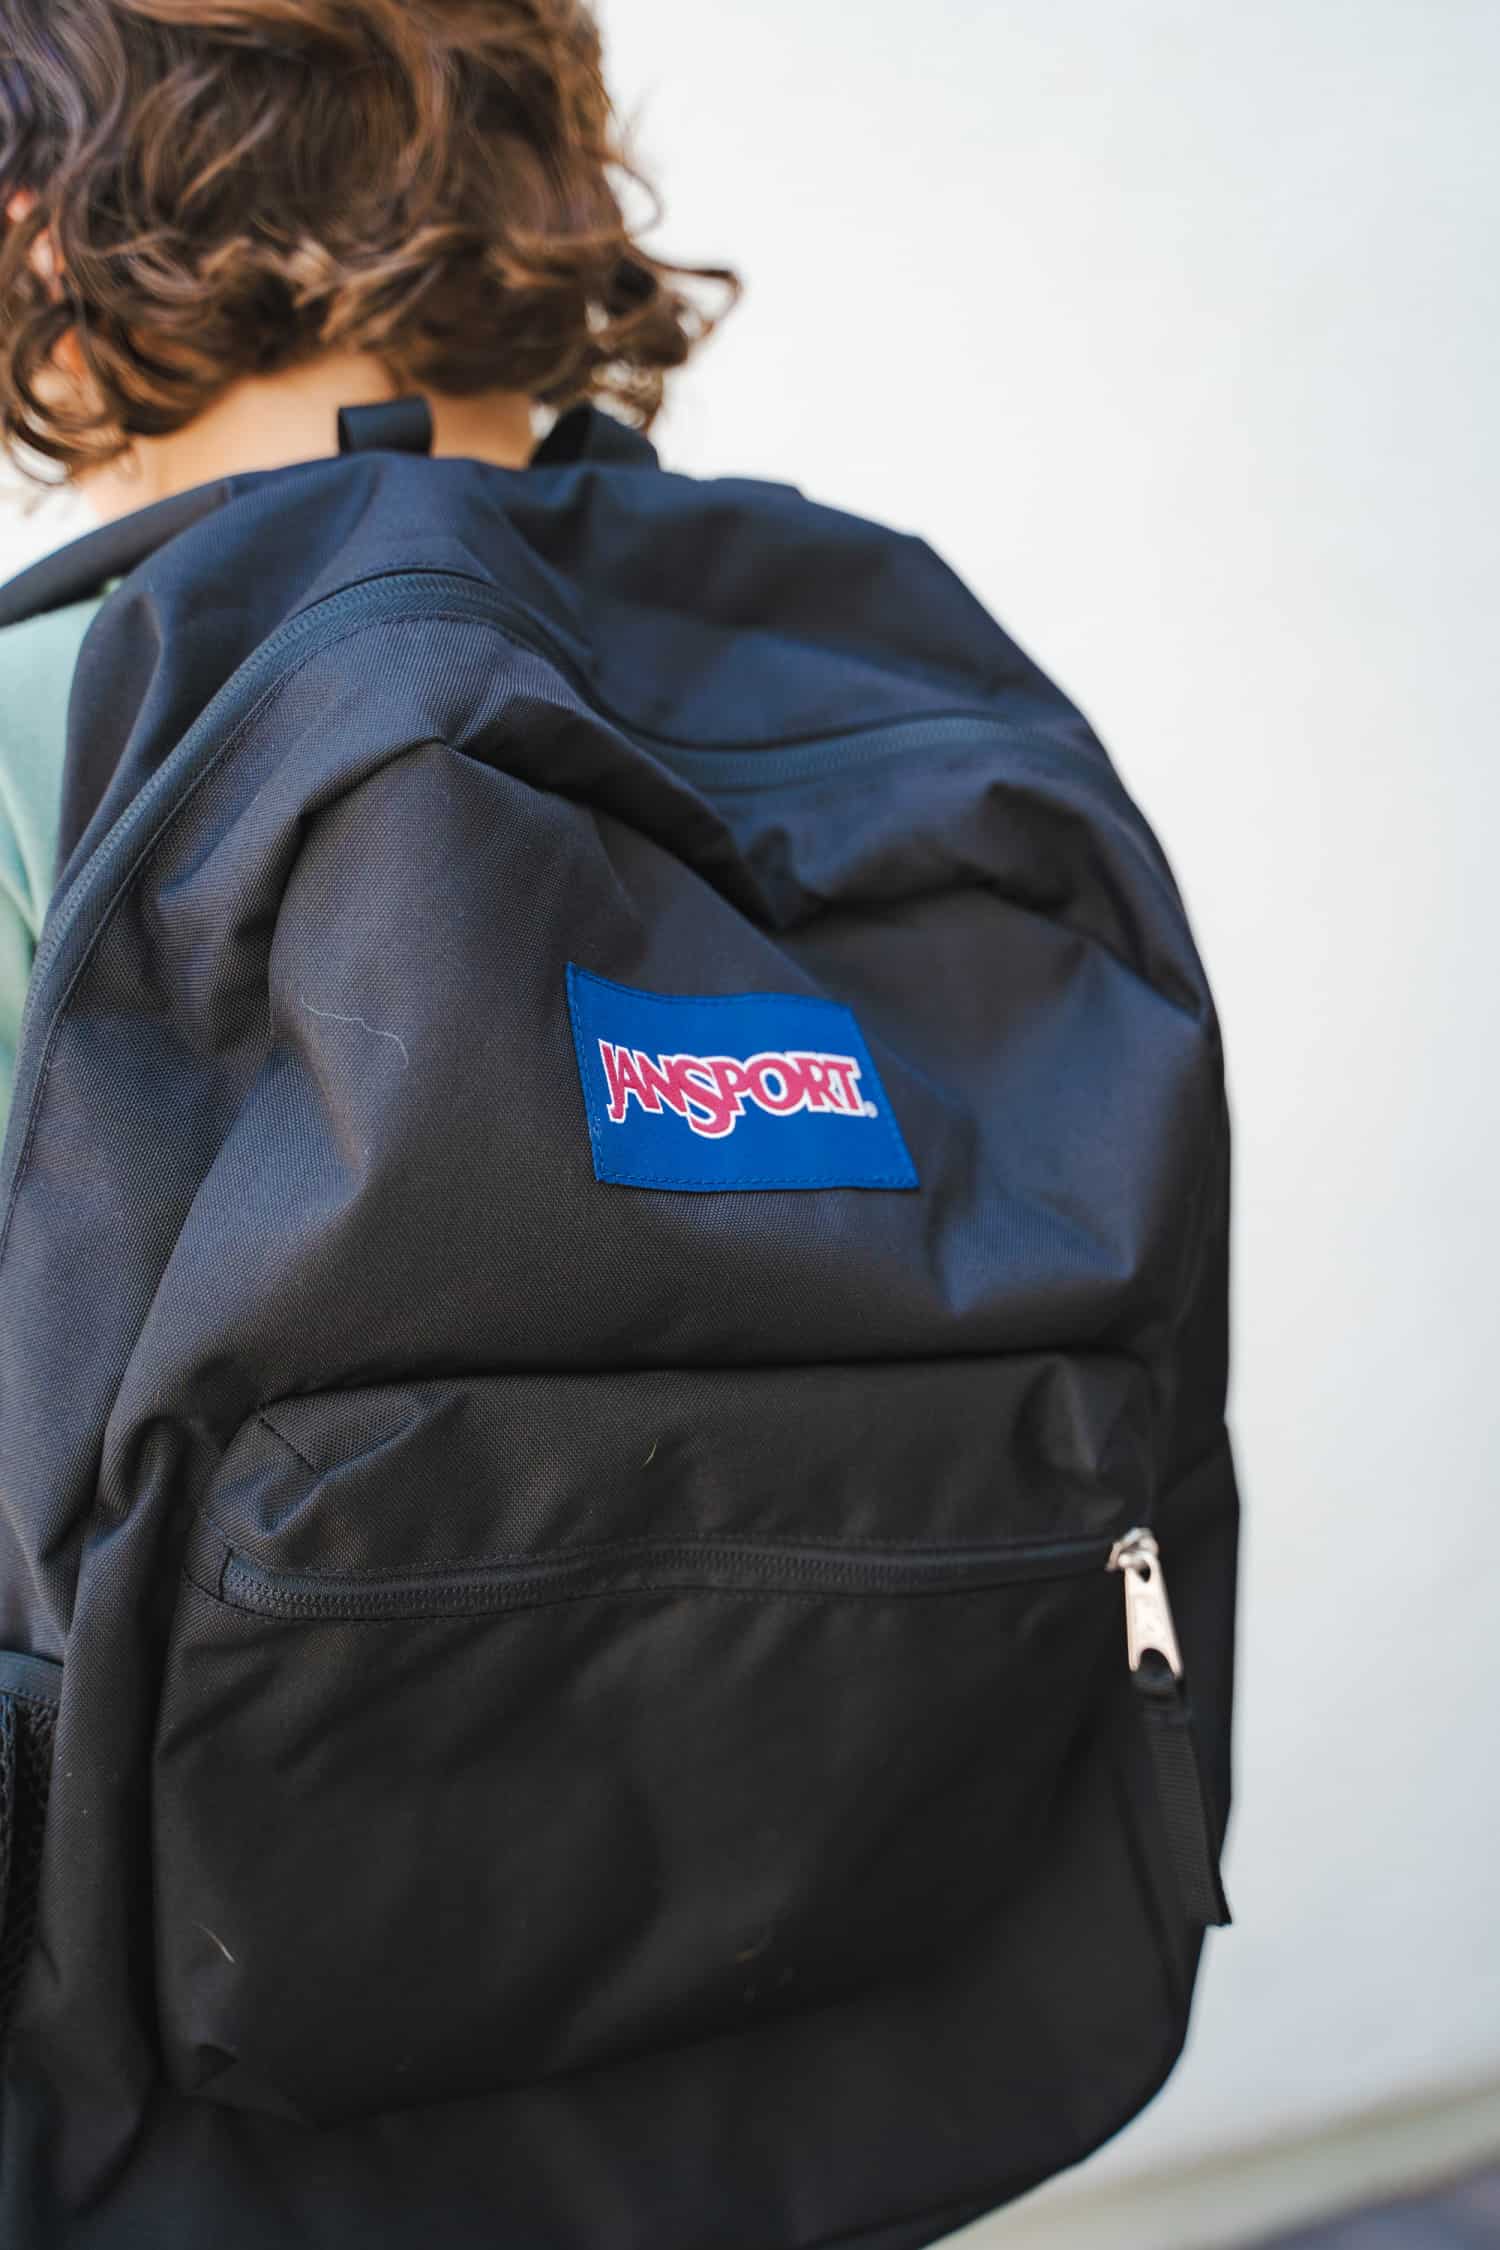 An up close view of a JanSport backpack on a child's back.